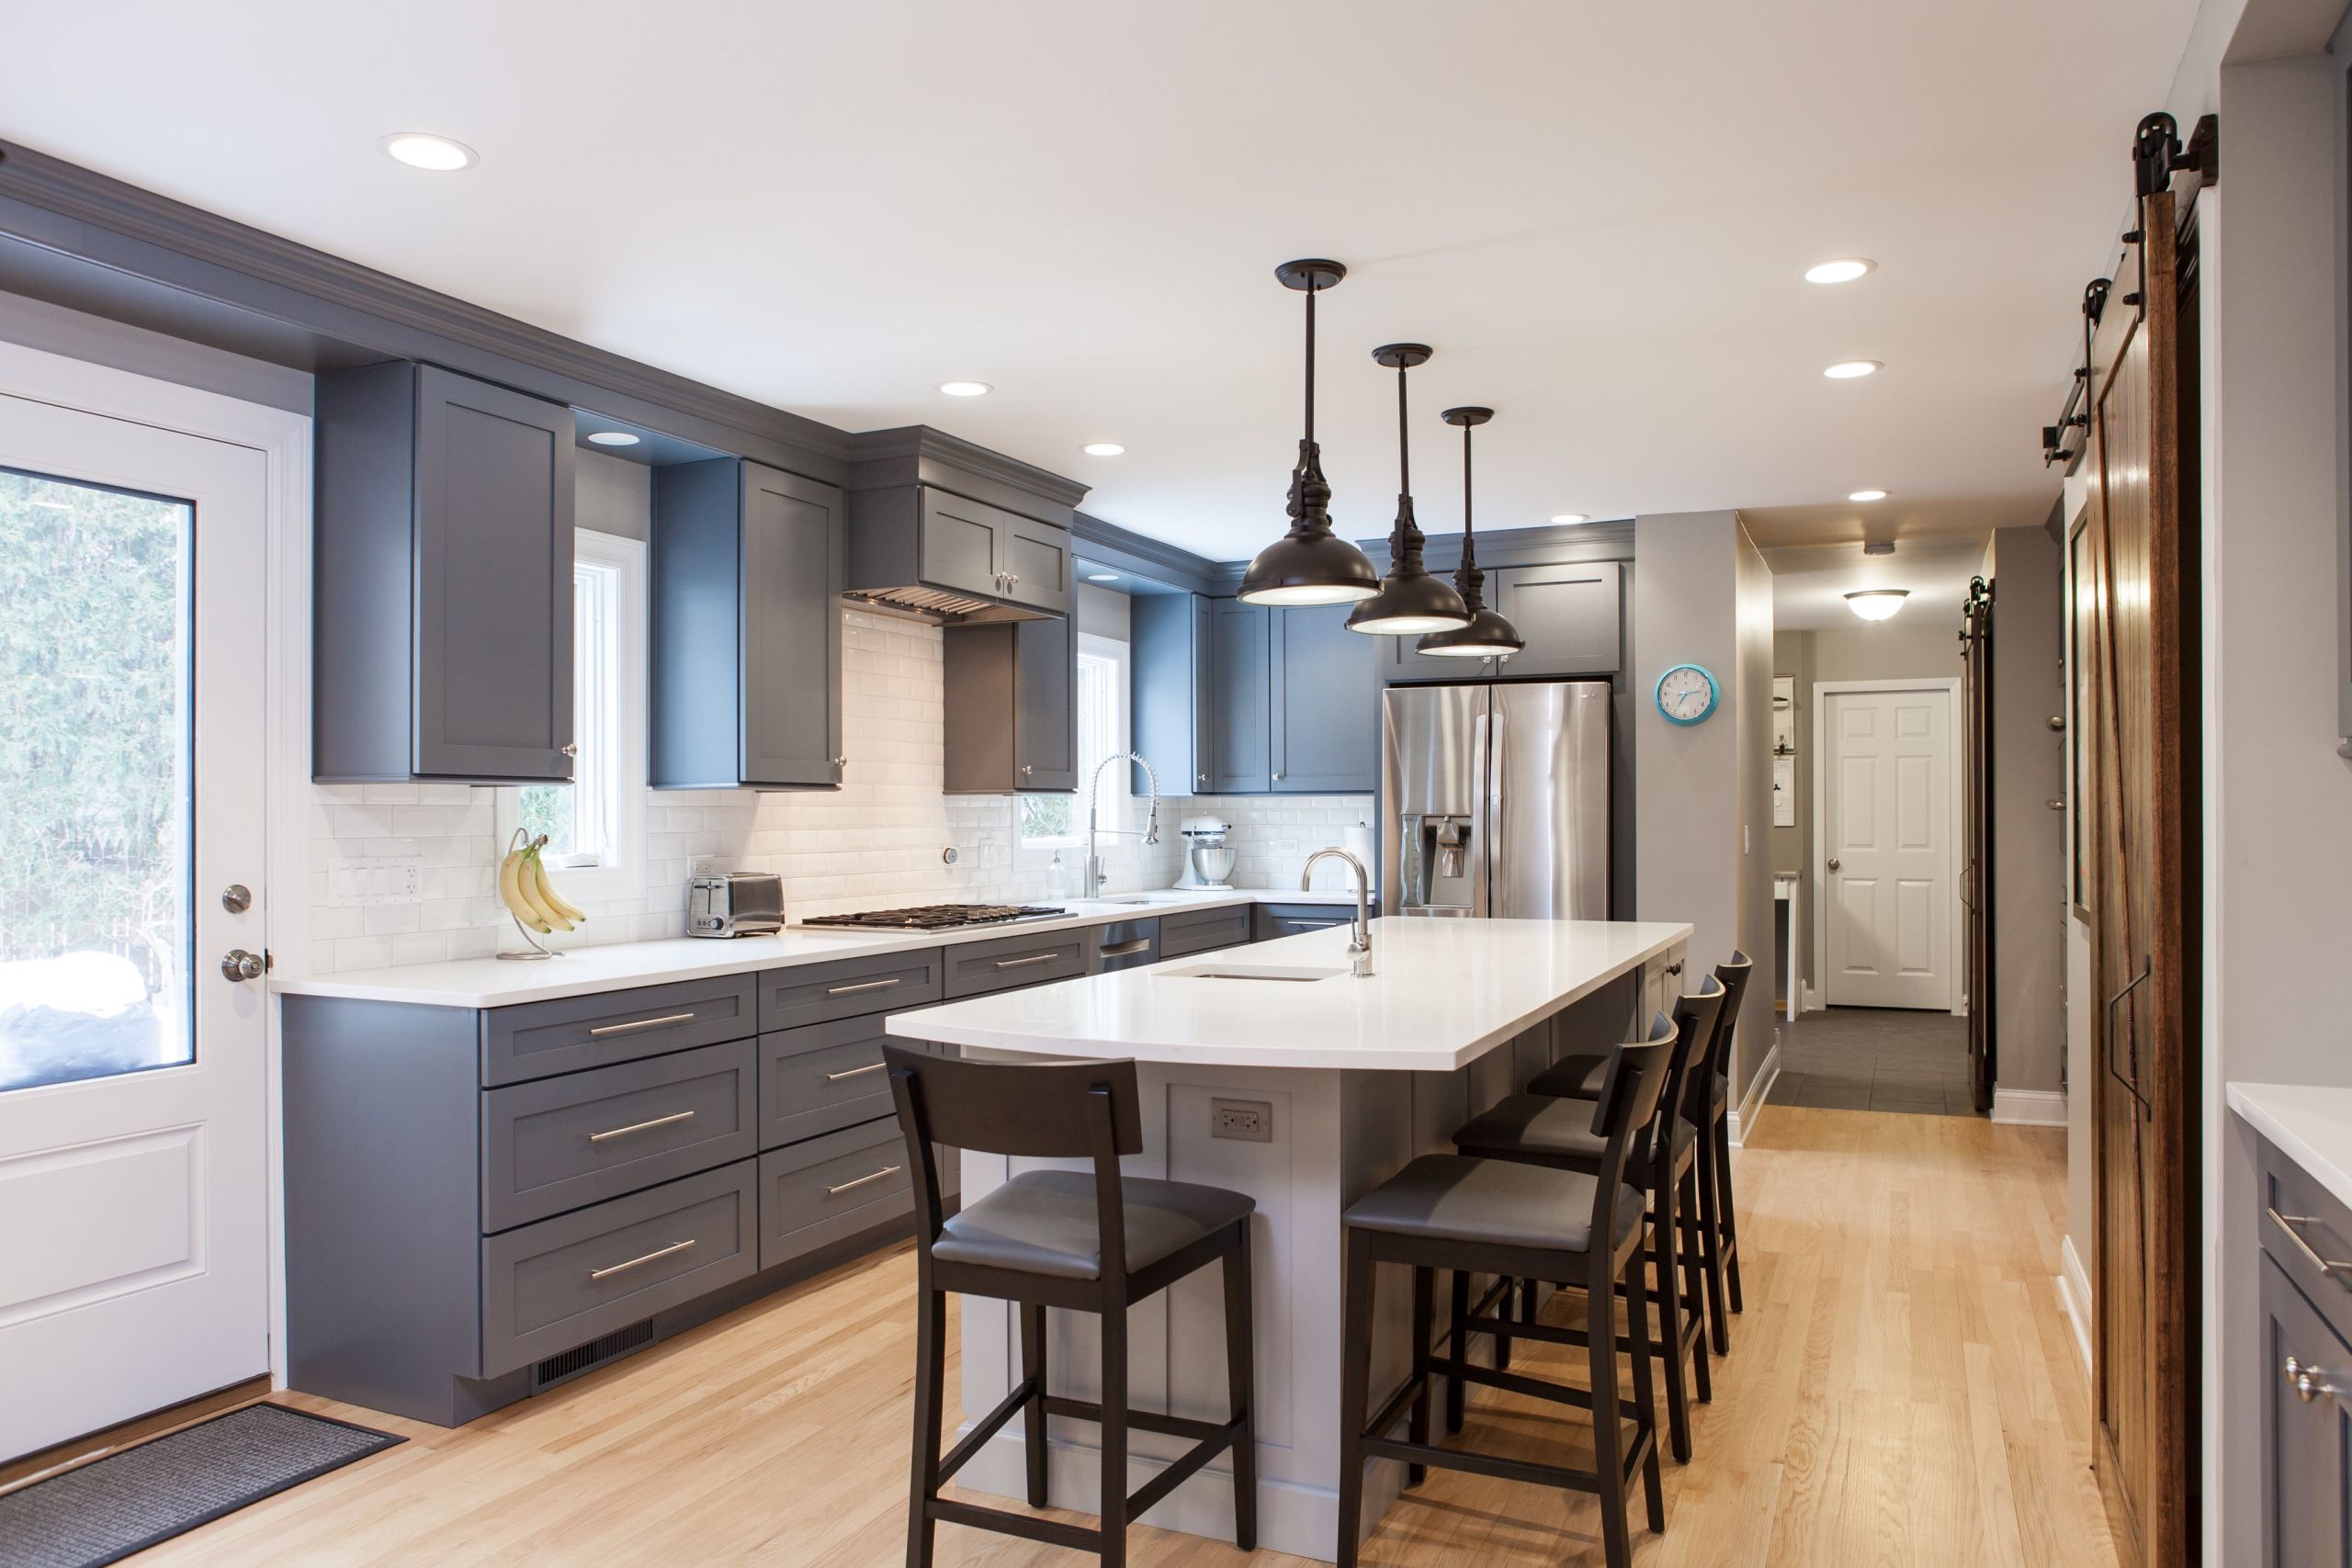 Kitchen Remodeling Chicago
 The Best Kitchen Remodelers in Chicago with s